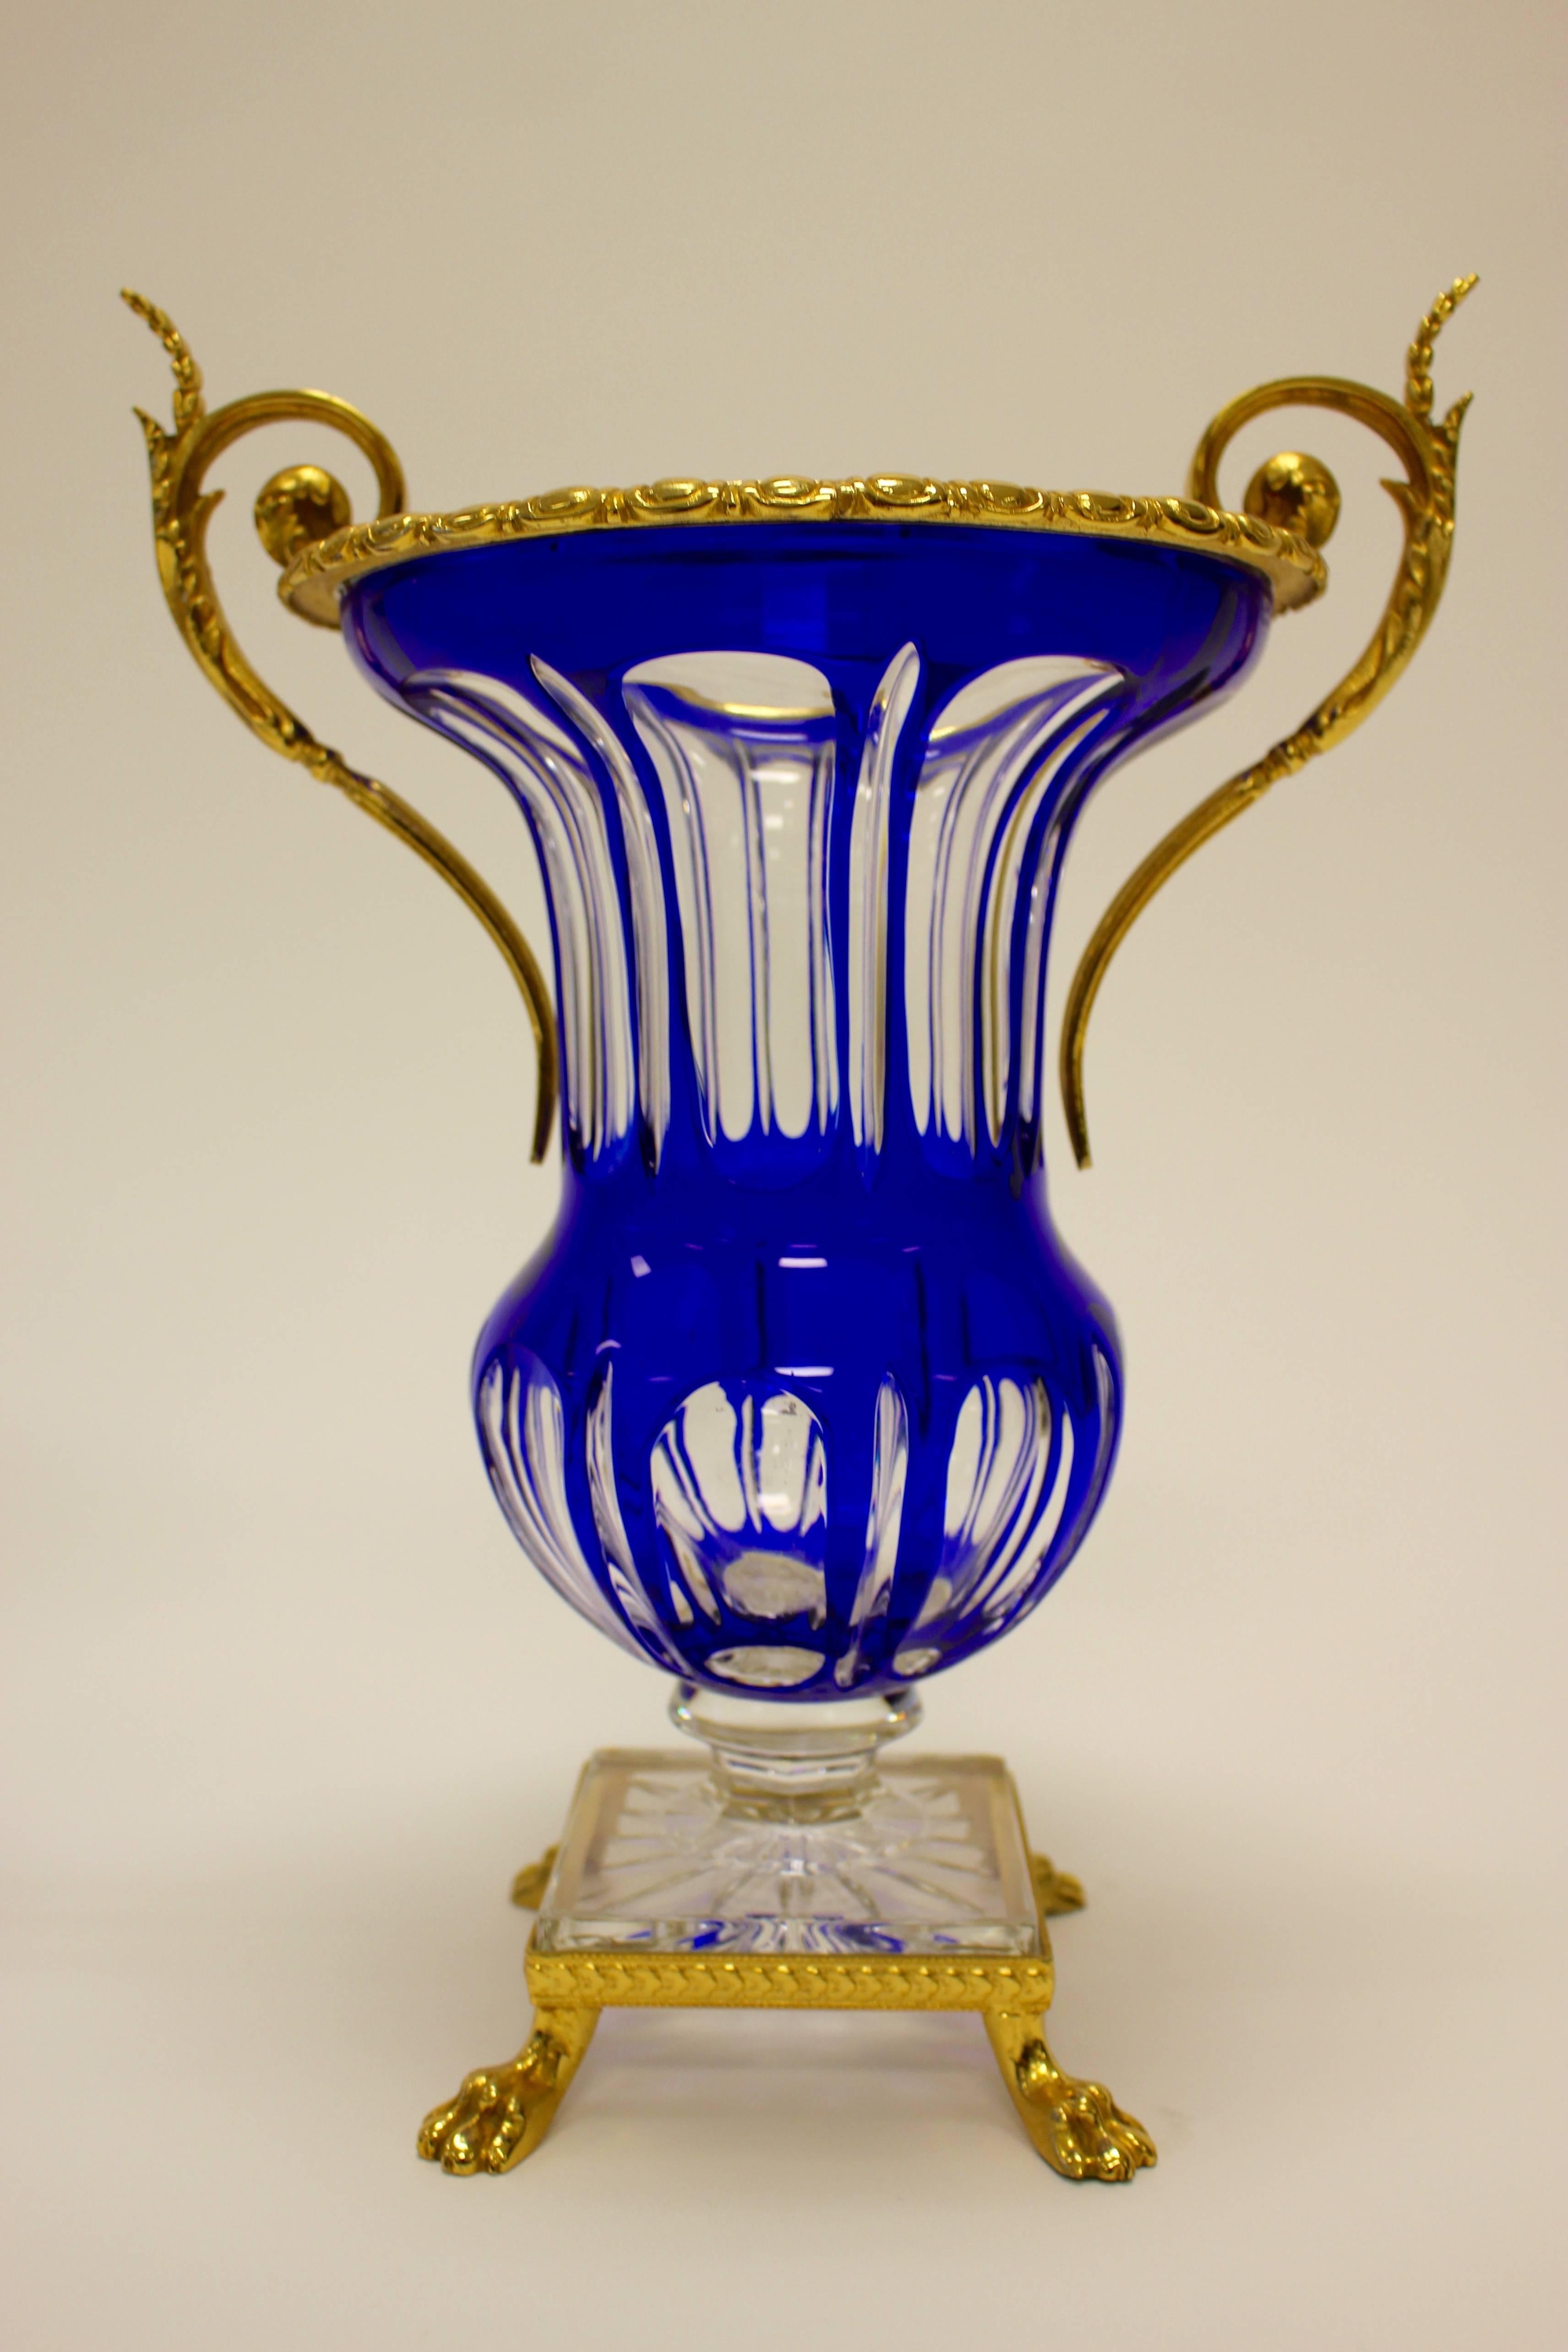 A pair of French gilt-metal clear crystal vases with cobalt-blue overlay from the mid-20th century. Each piece presents a waisted body over a swollen base atop a short baluster-shaped connector resting on a square pedestal. A beautiful cobalt-blue